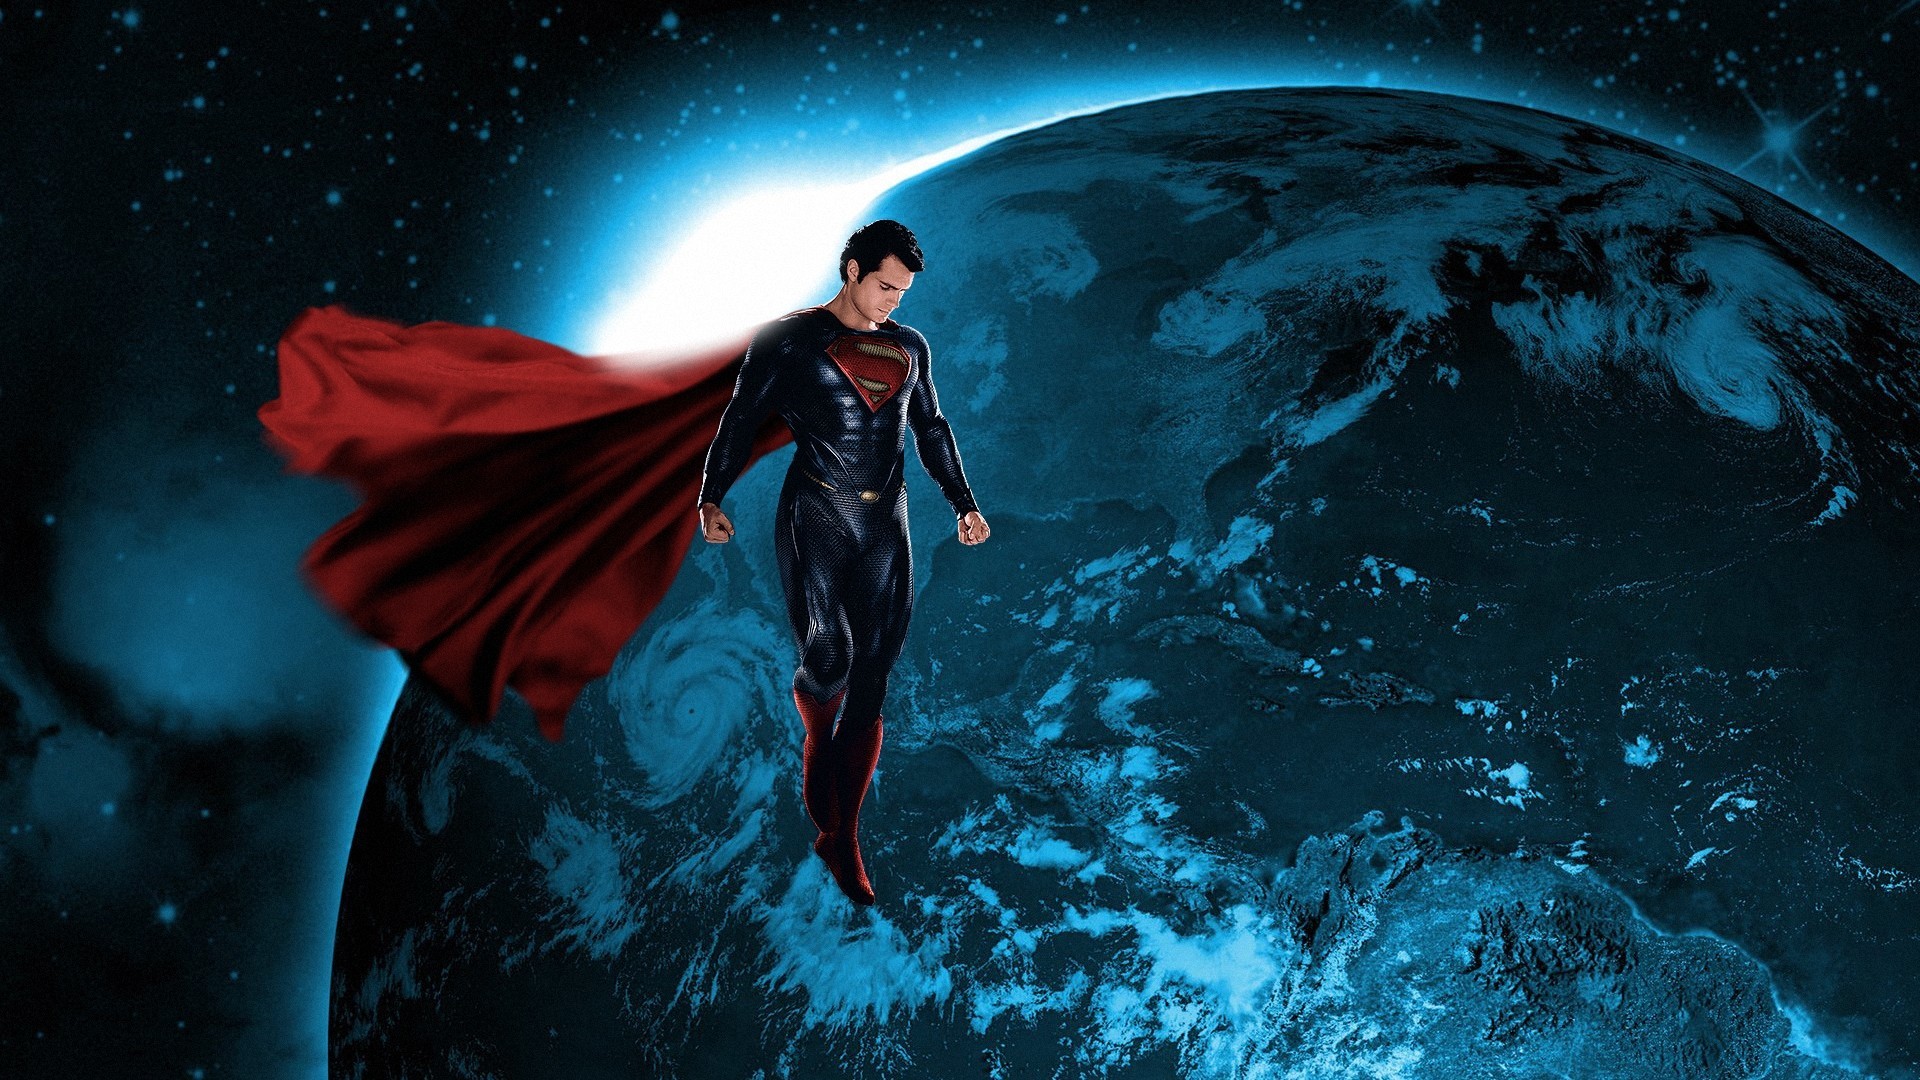 Awesome Superman Wallpapers